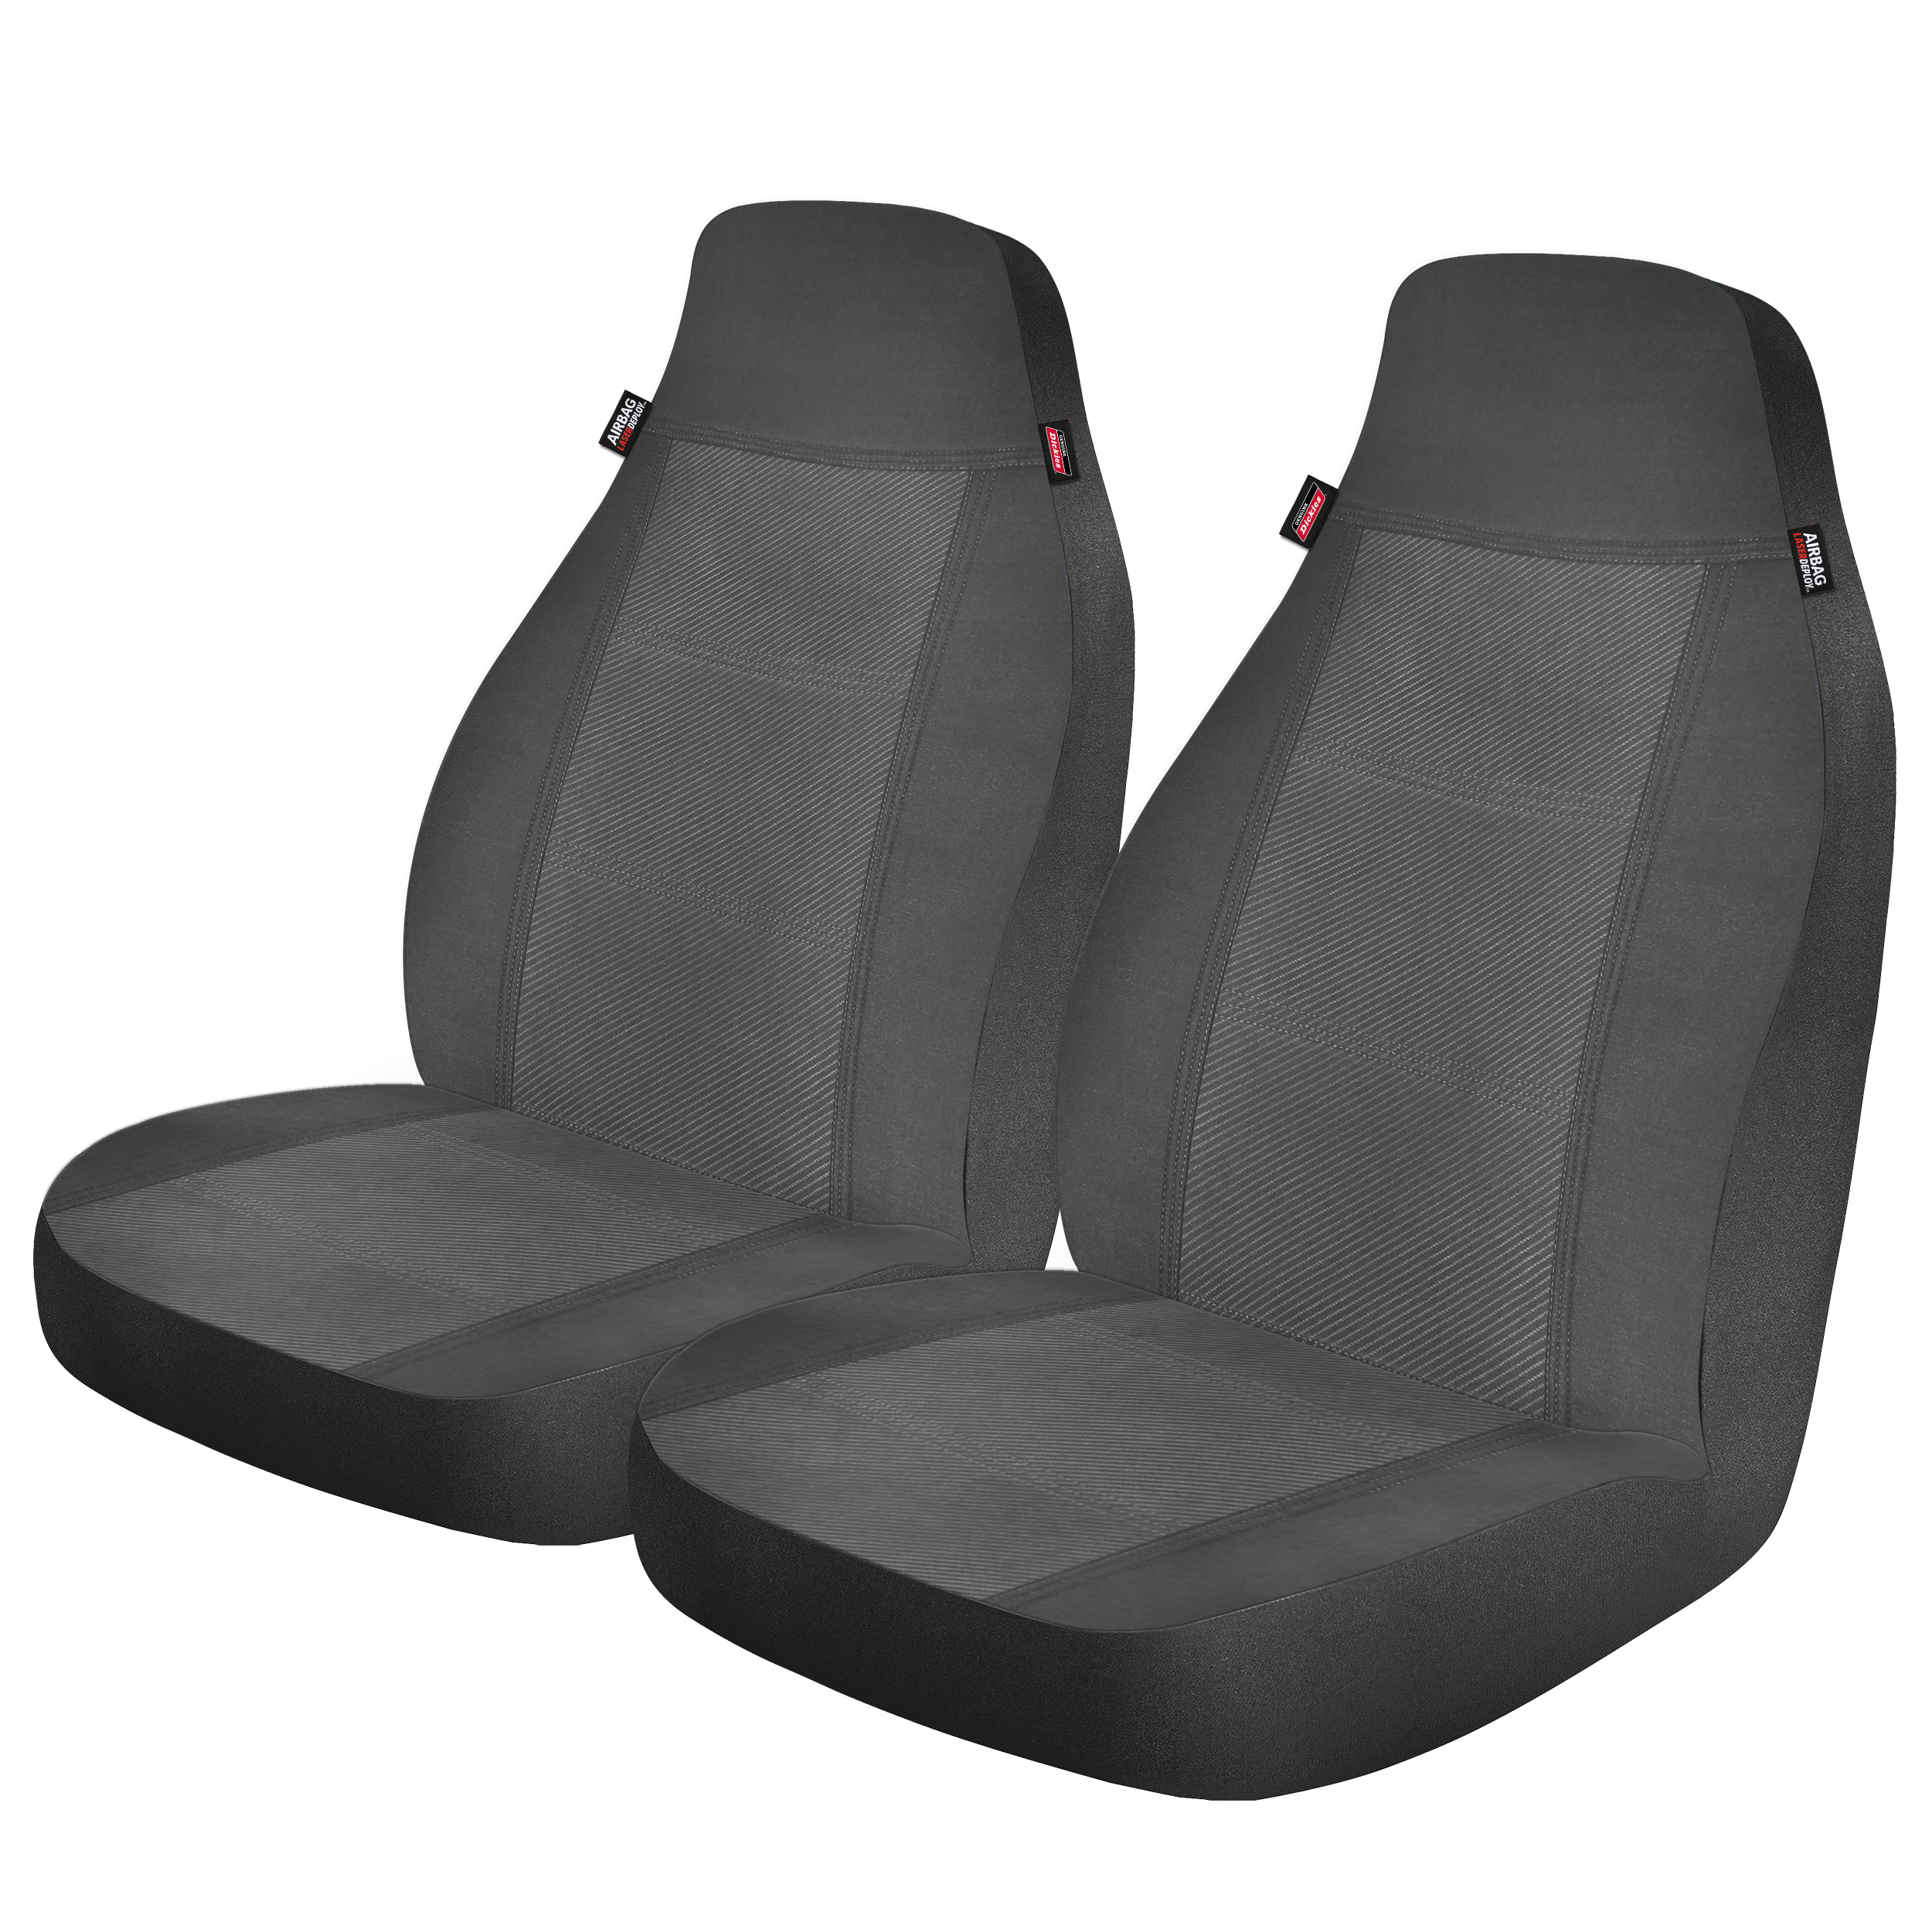 Genuine Dickies 2 Piece Noah Polyester Front Car Seat Covers Black, 806414 - image 1 of 16